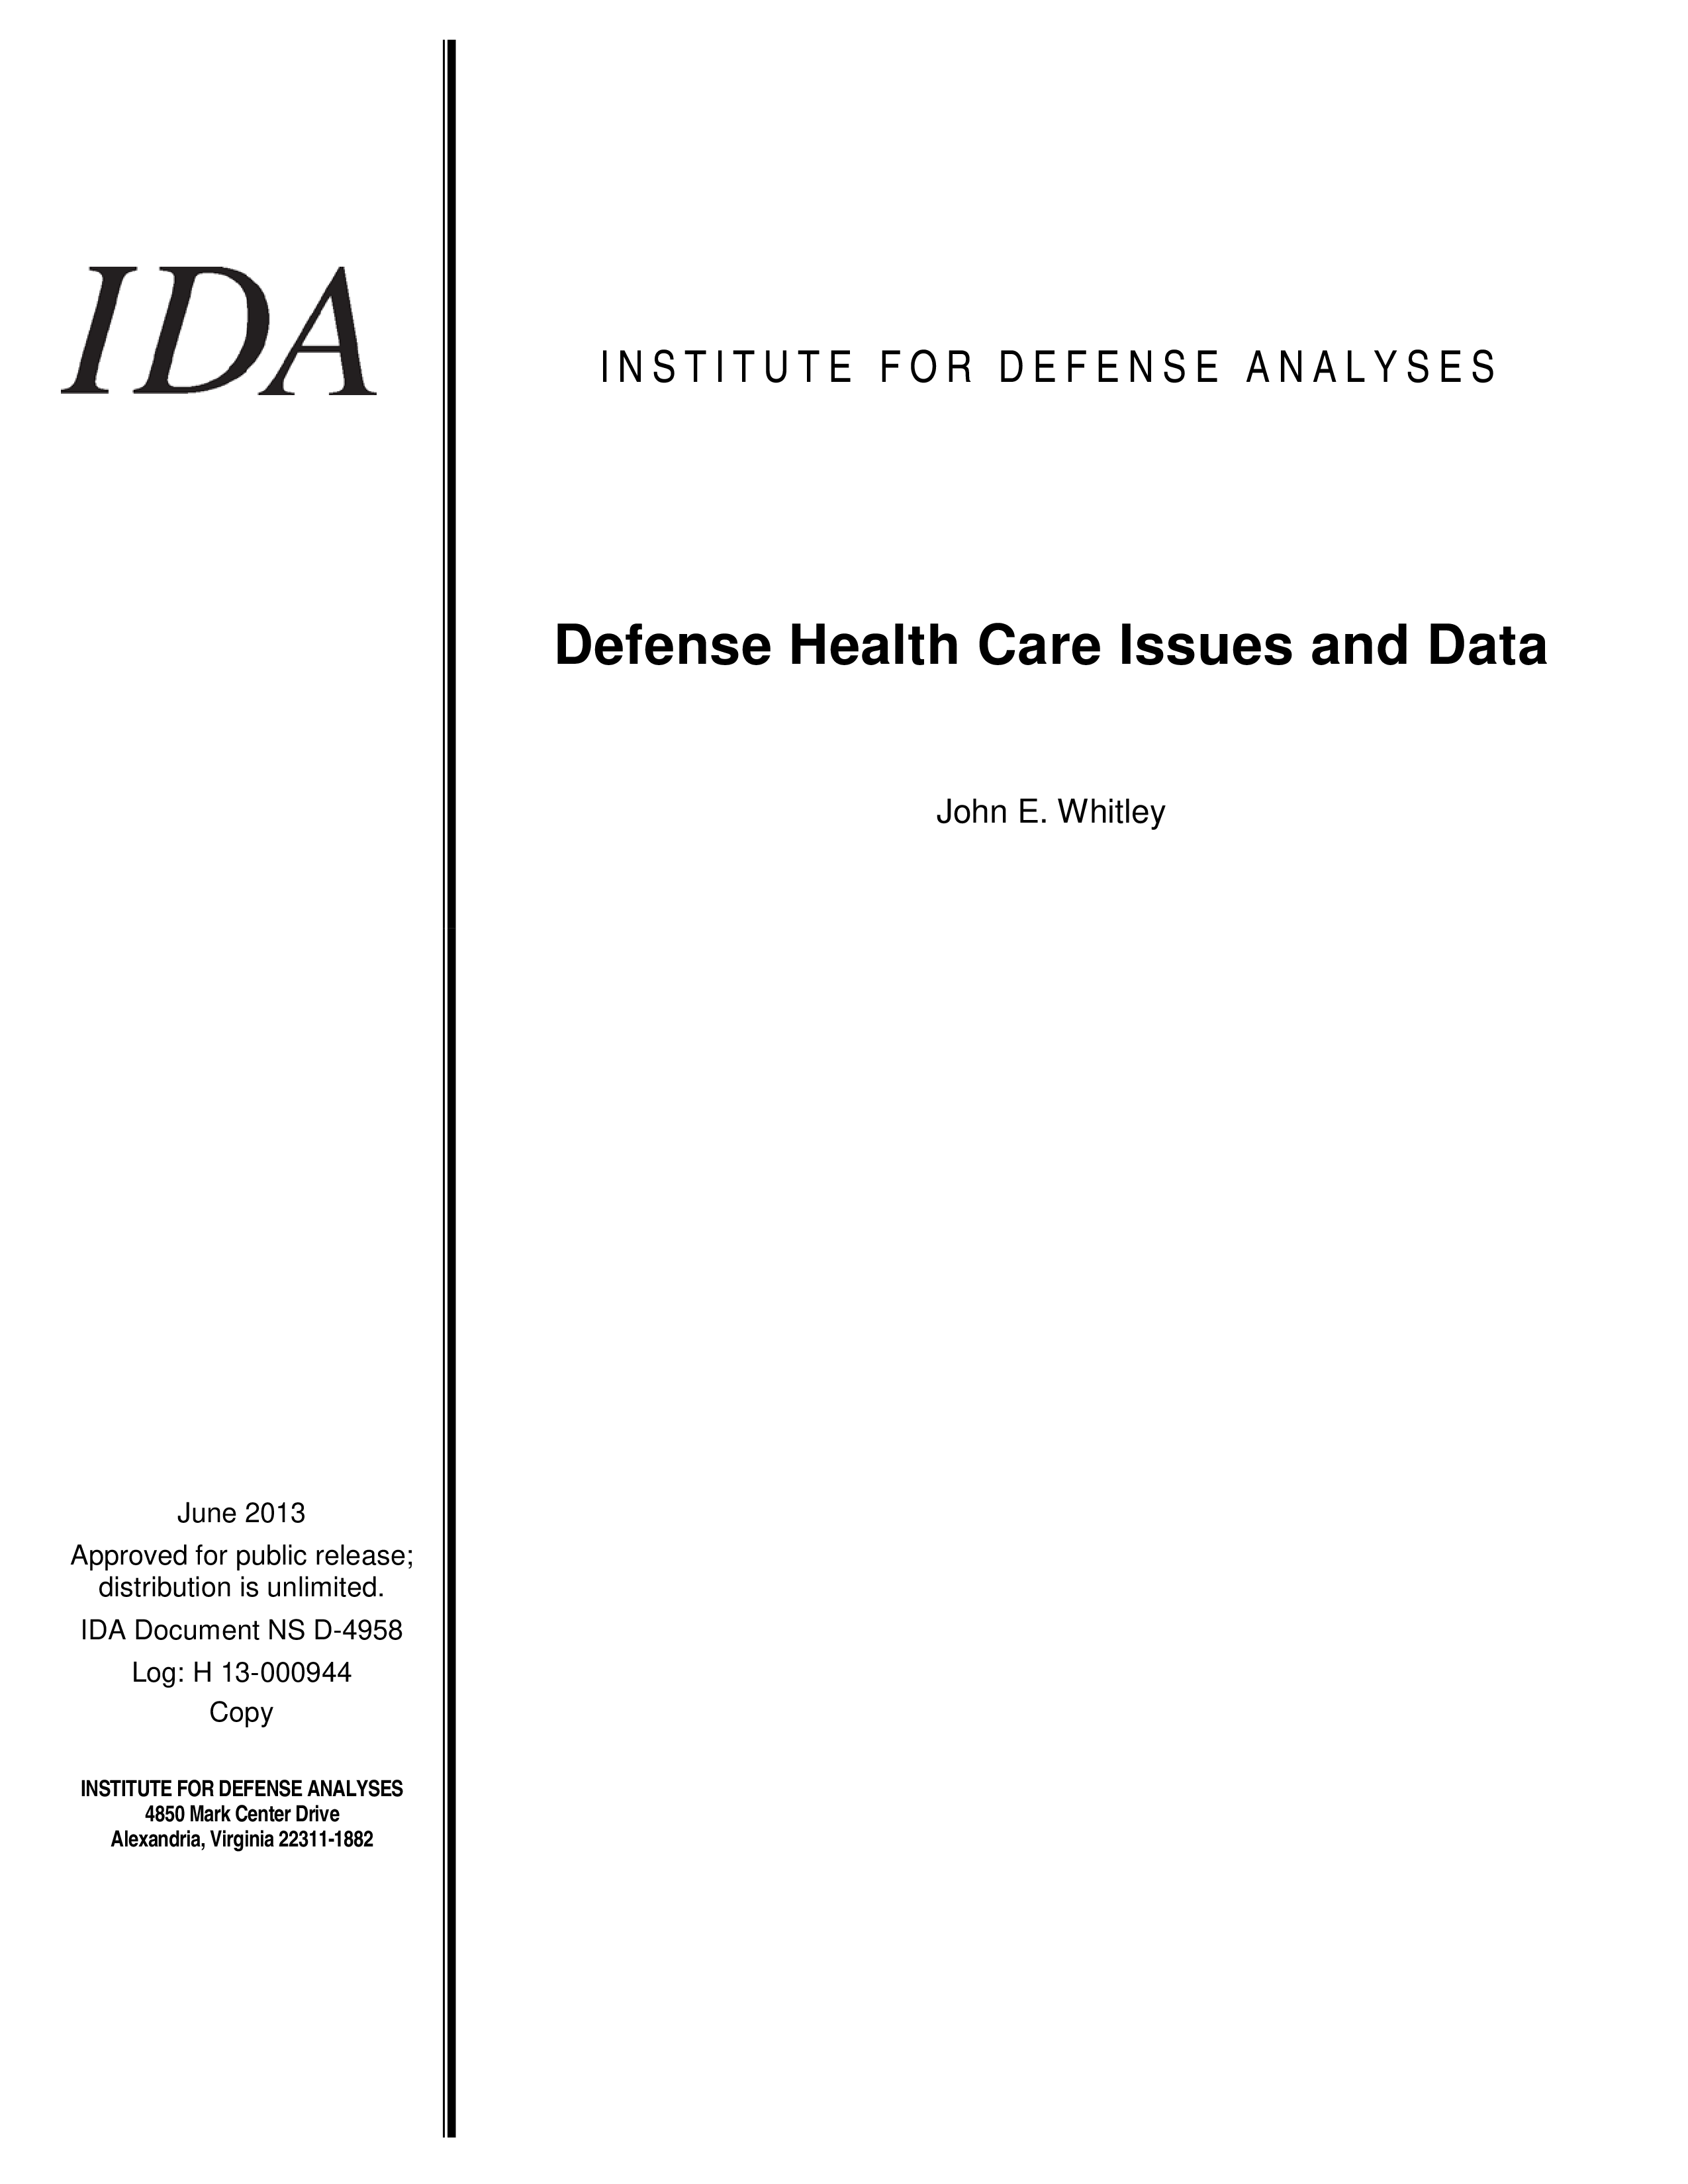 Defense Health Care Issues and Data